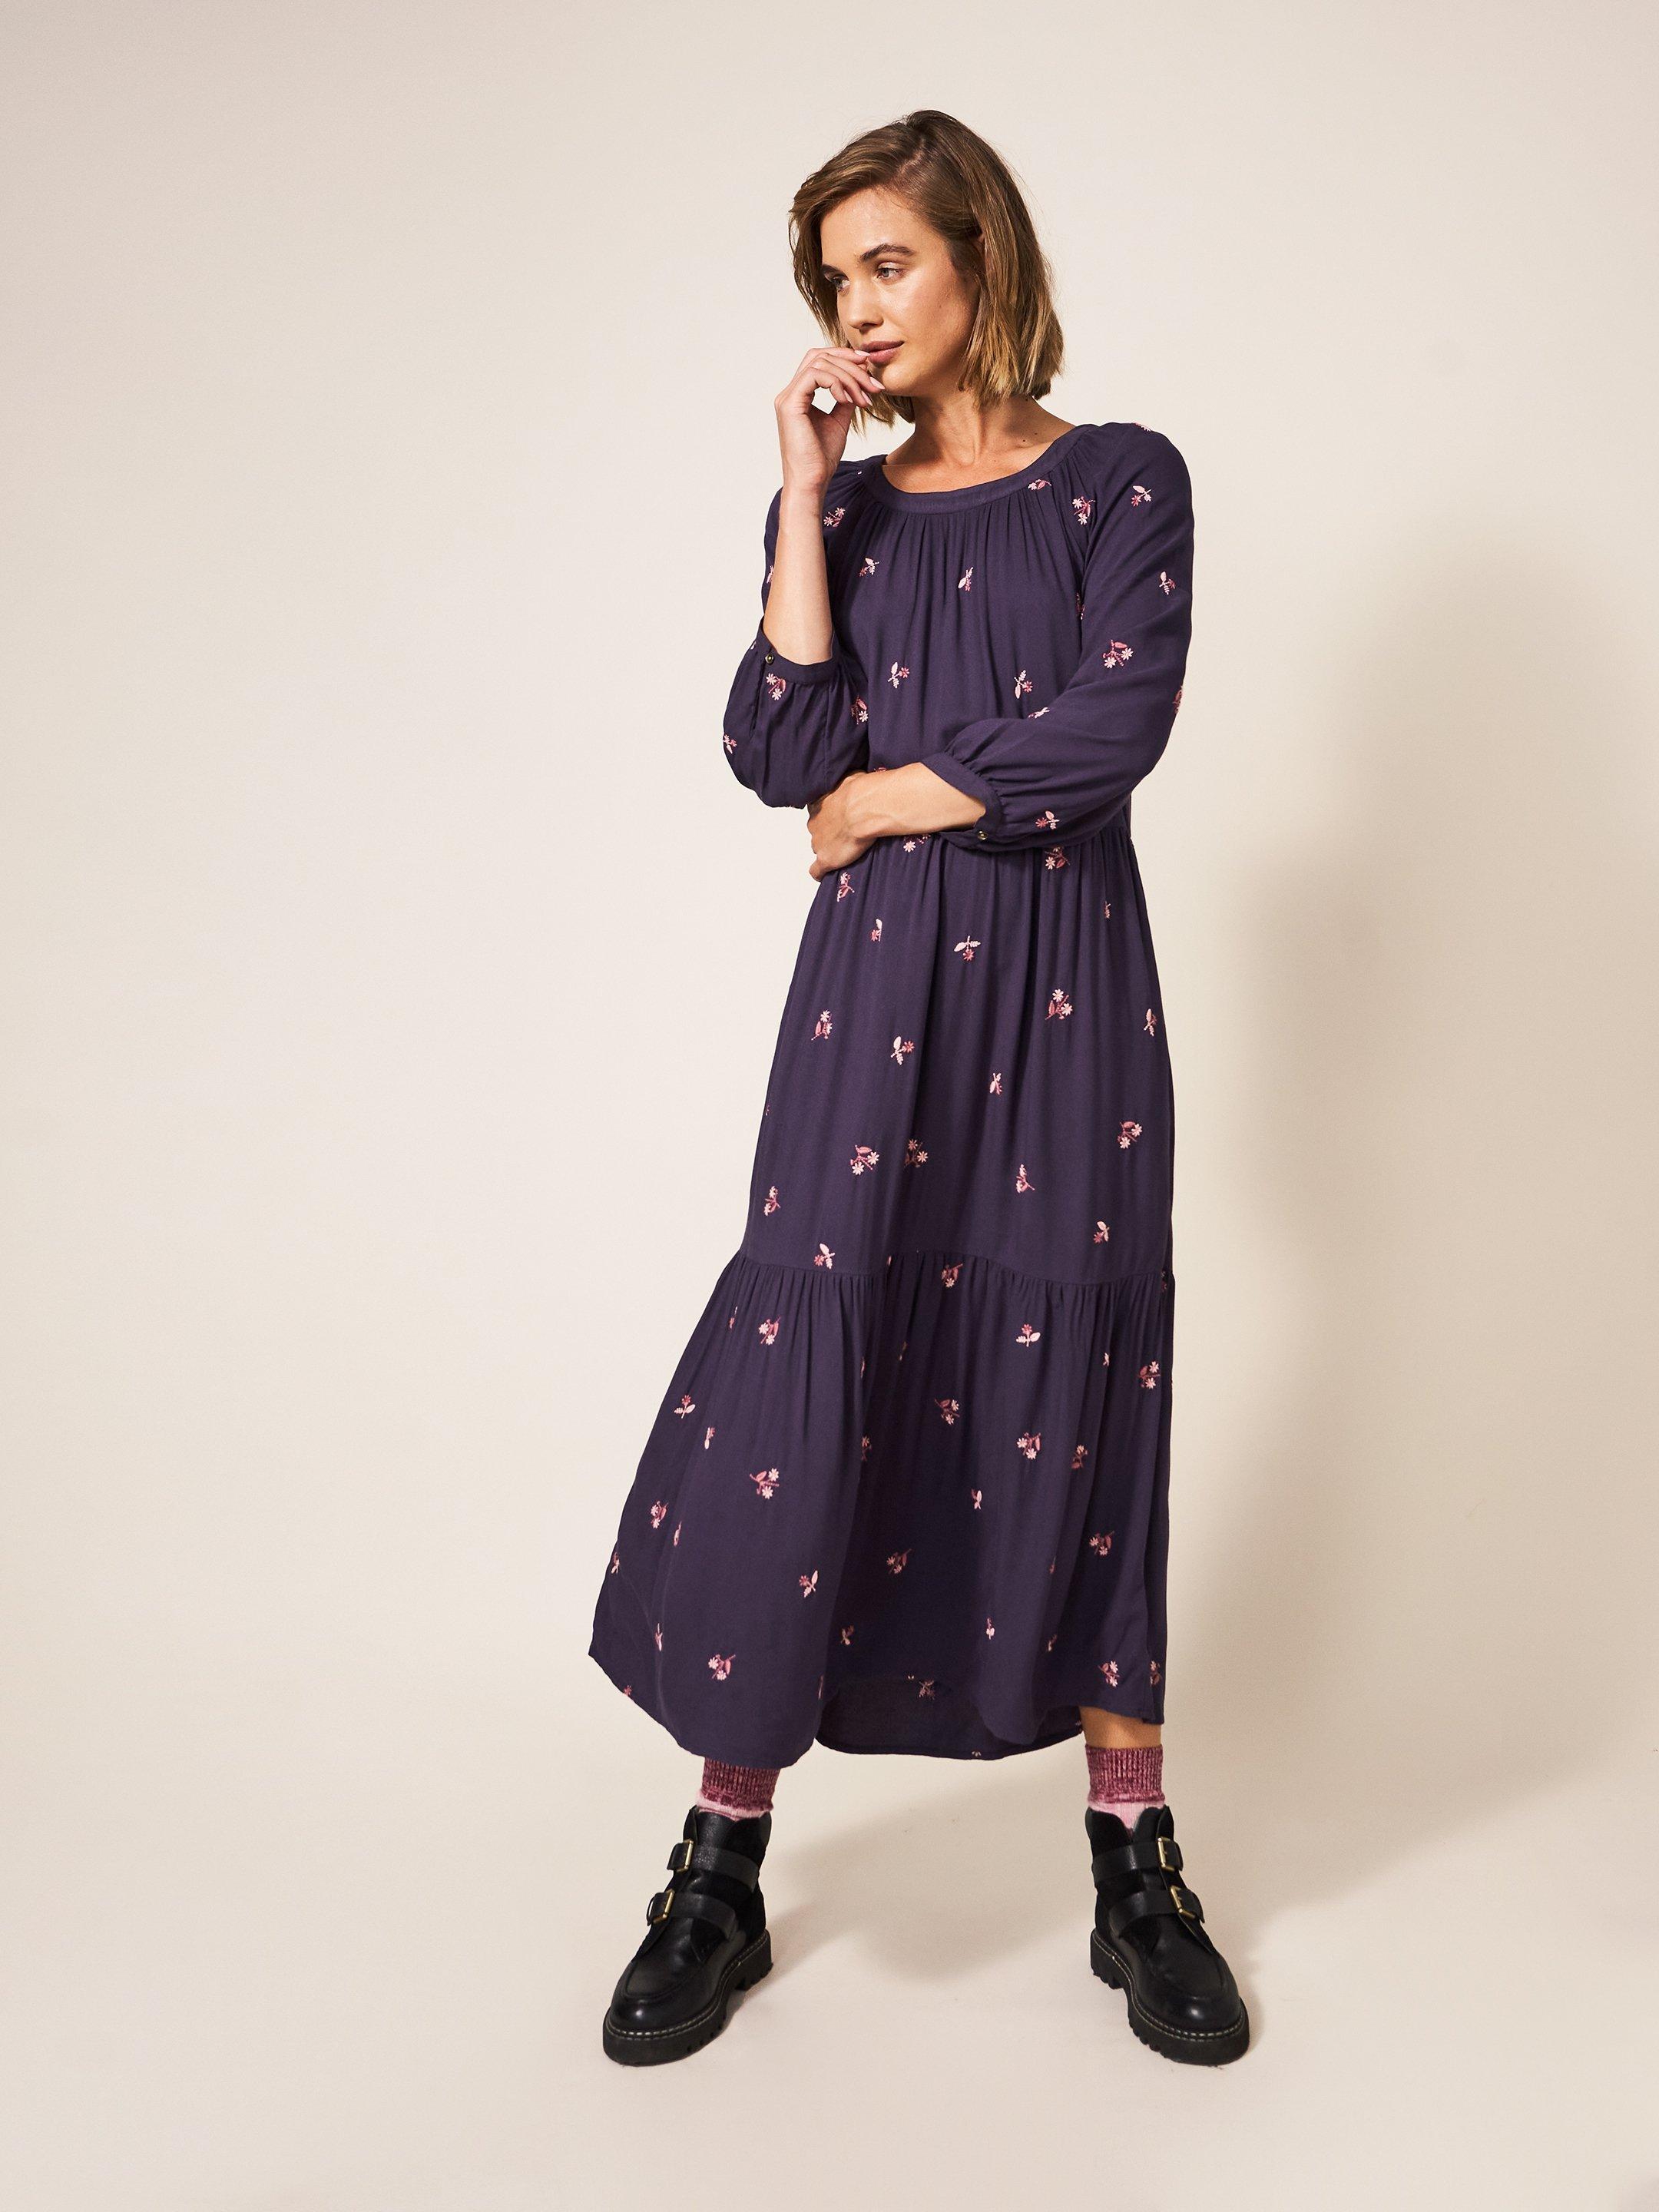 Clara Embroidered Dress in PURPLE MLT - LIFESTYLE